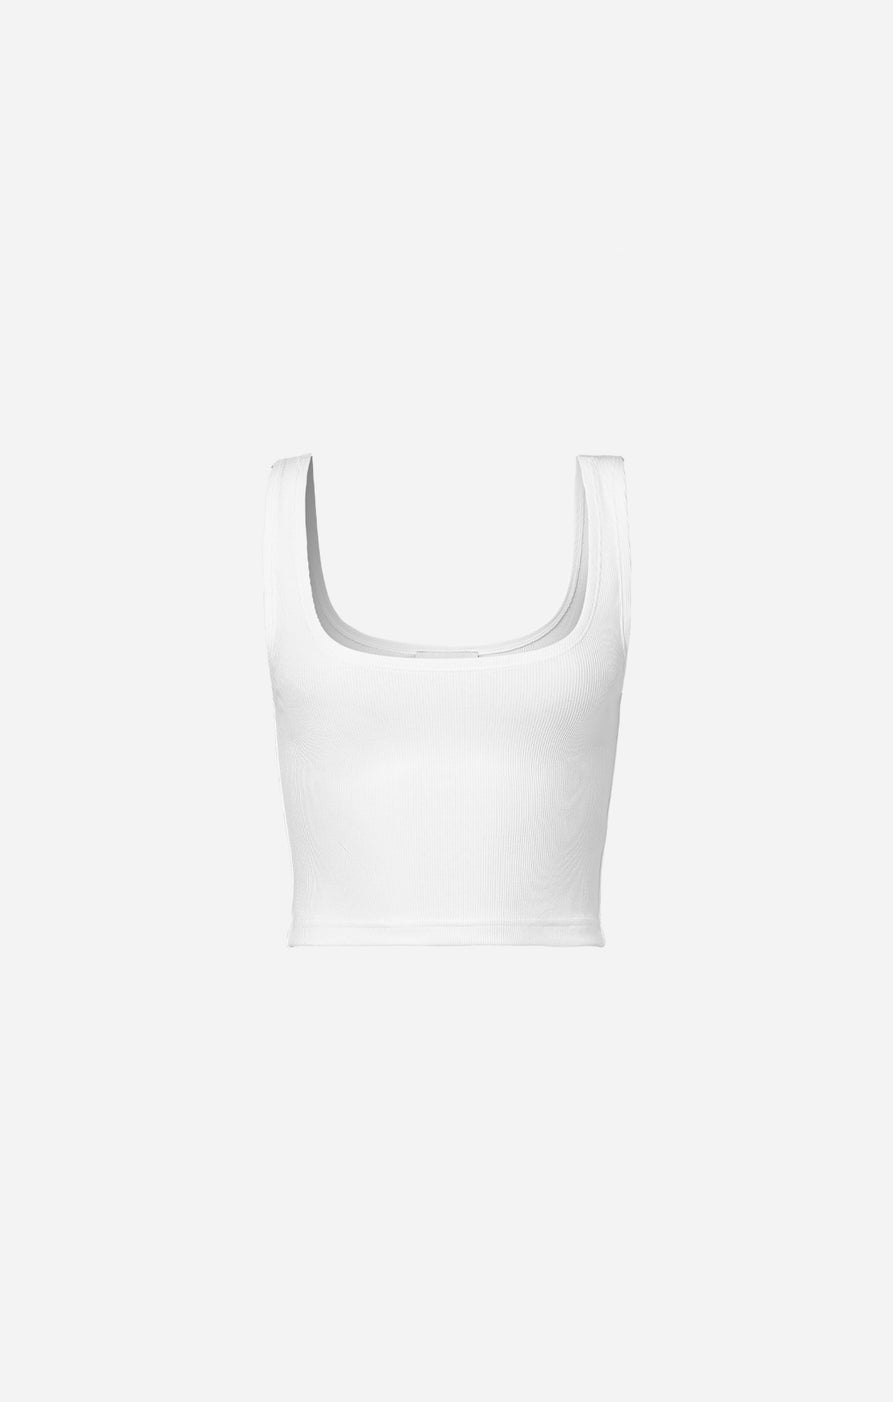 THE LUXE RIB CROP - WHITE